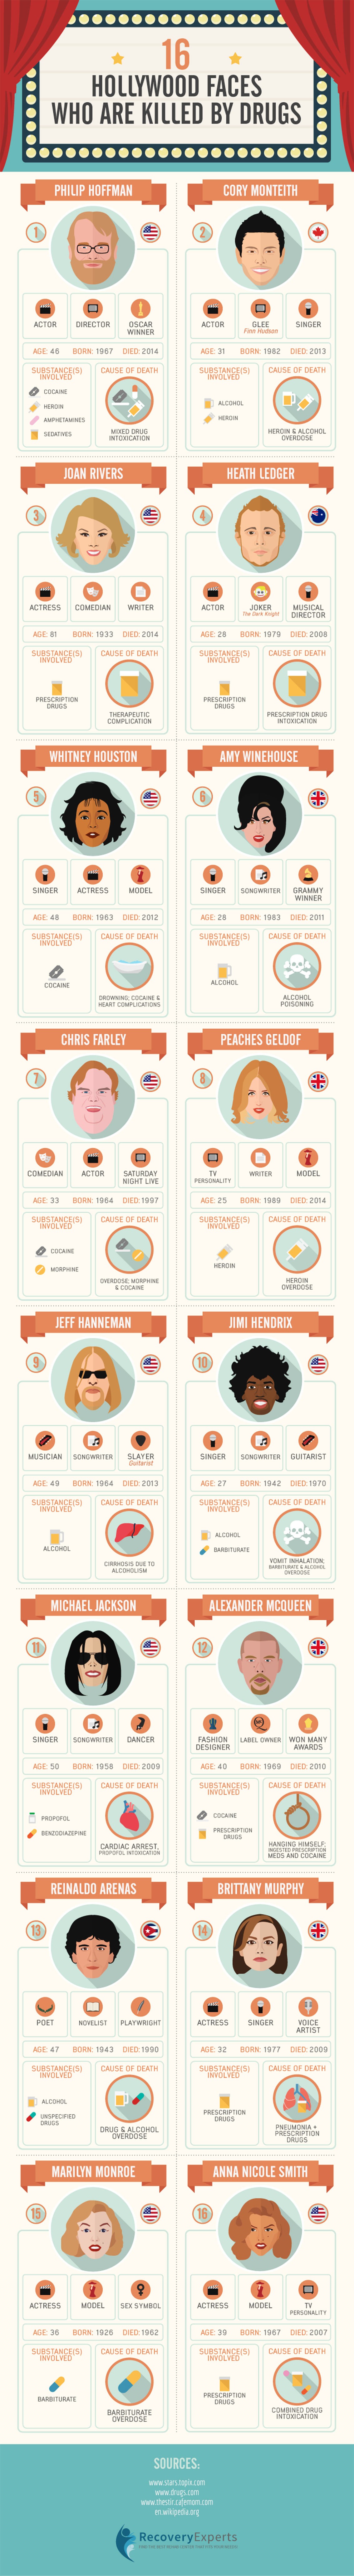 Celebrity Faces Who Are Killed by Drugs Infographic